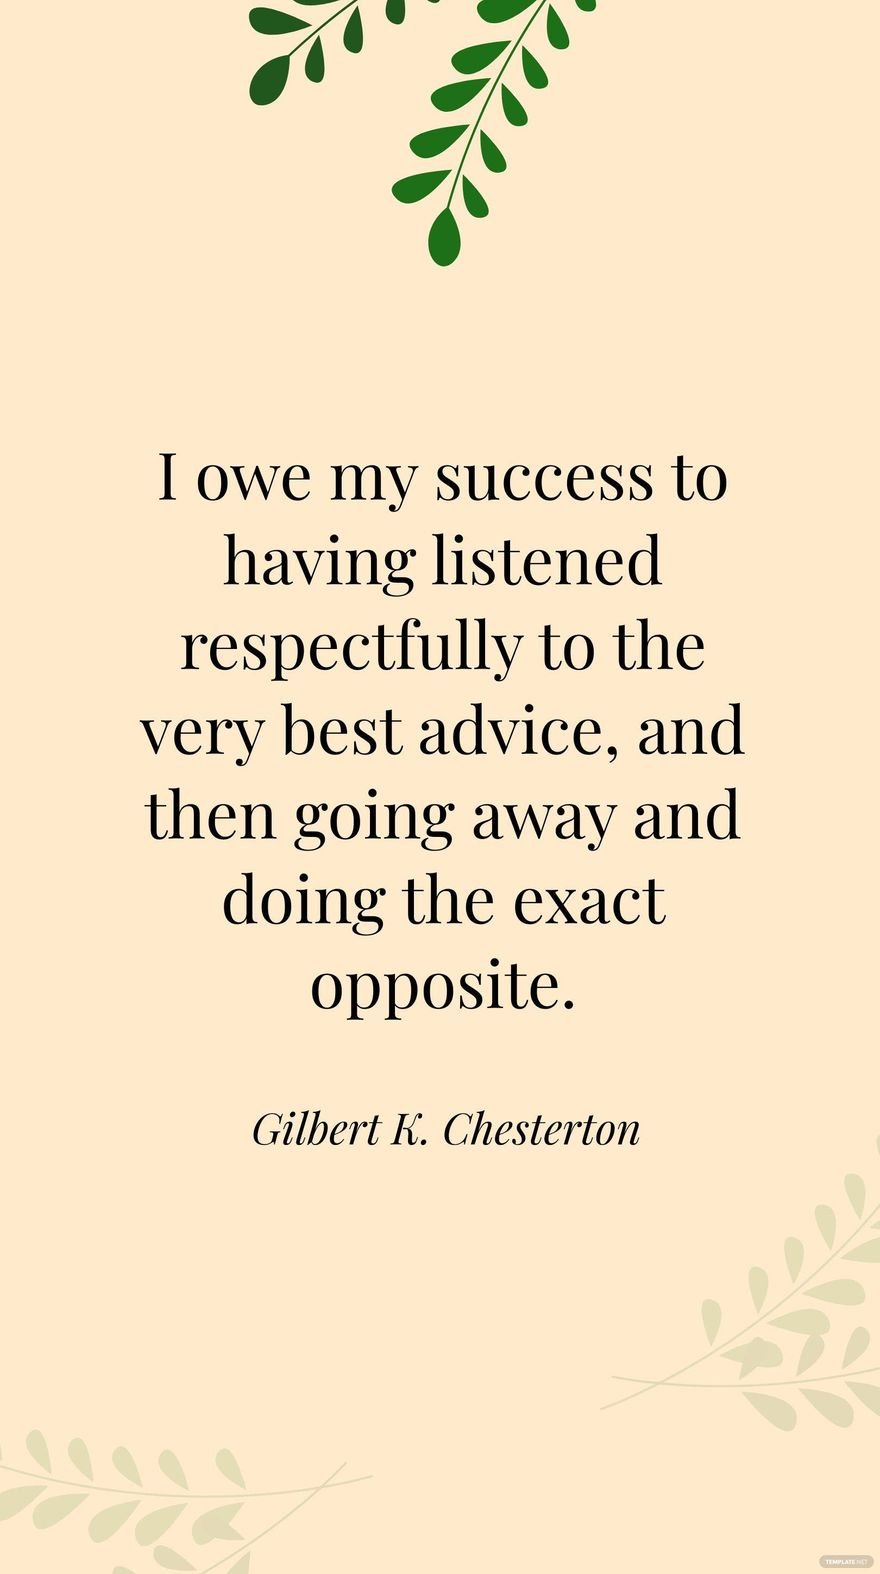 Gilbert K. Chesterton- I owe my success to having listened respectfully to the very best advice, and then going away and doing the exact opposite.